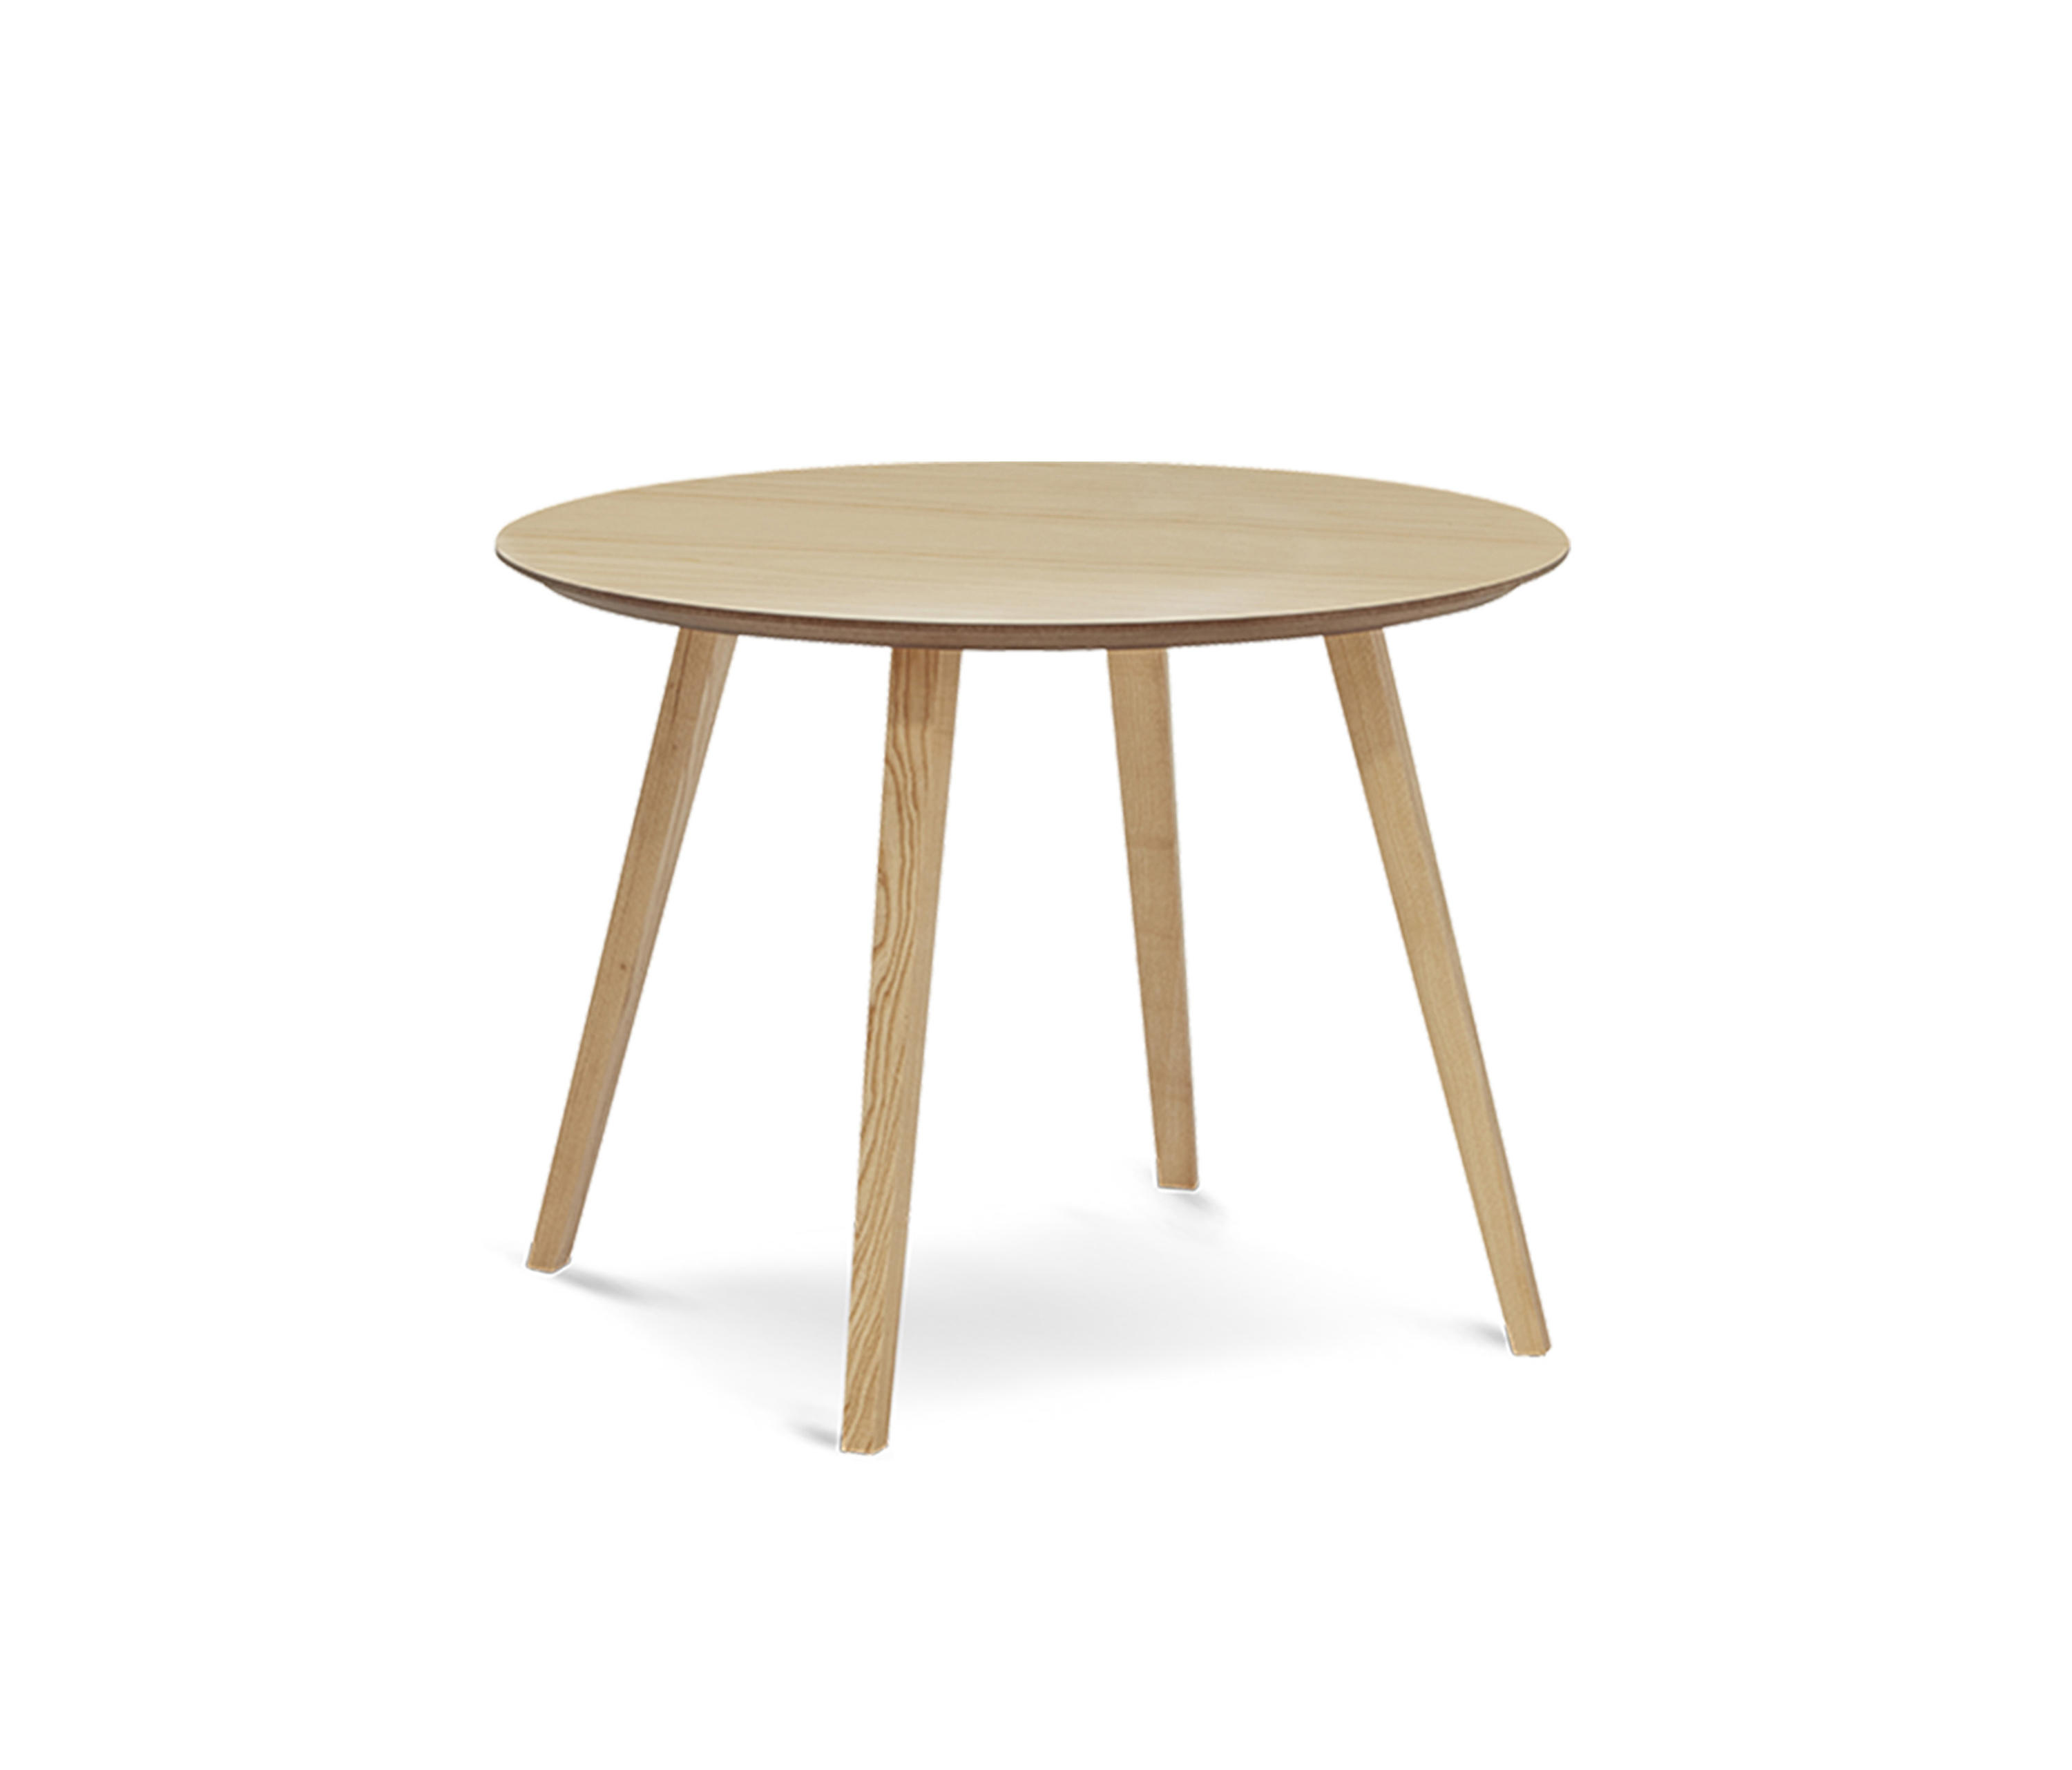 WOODPLATE - Coffee tables from B&T Design | Architonic